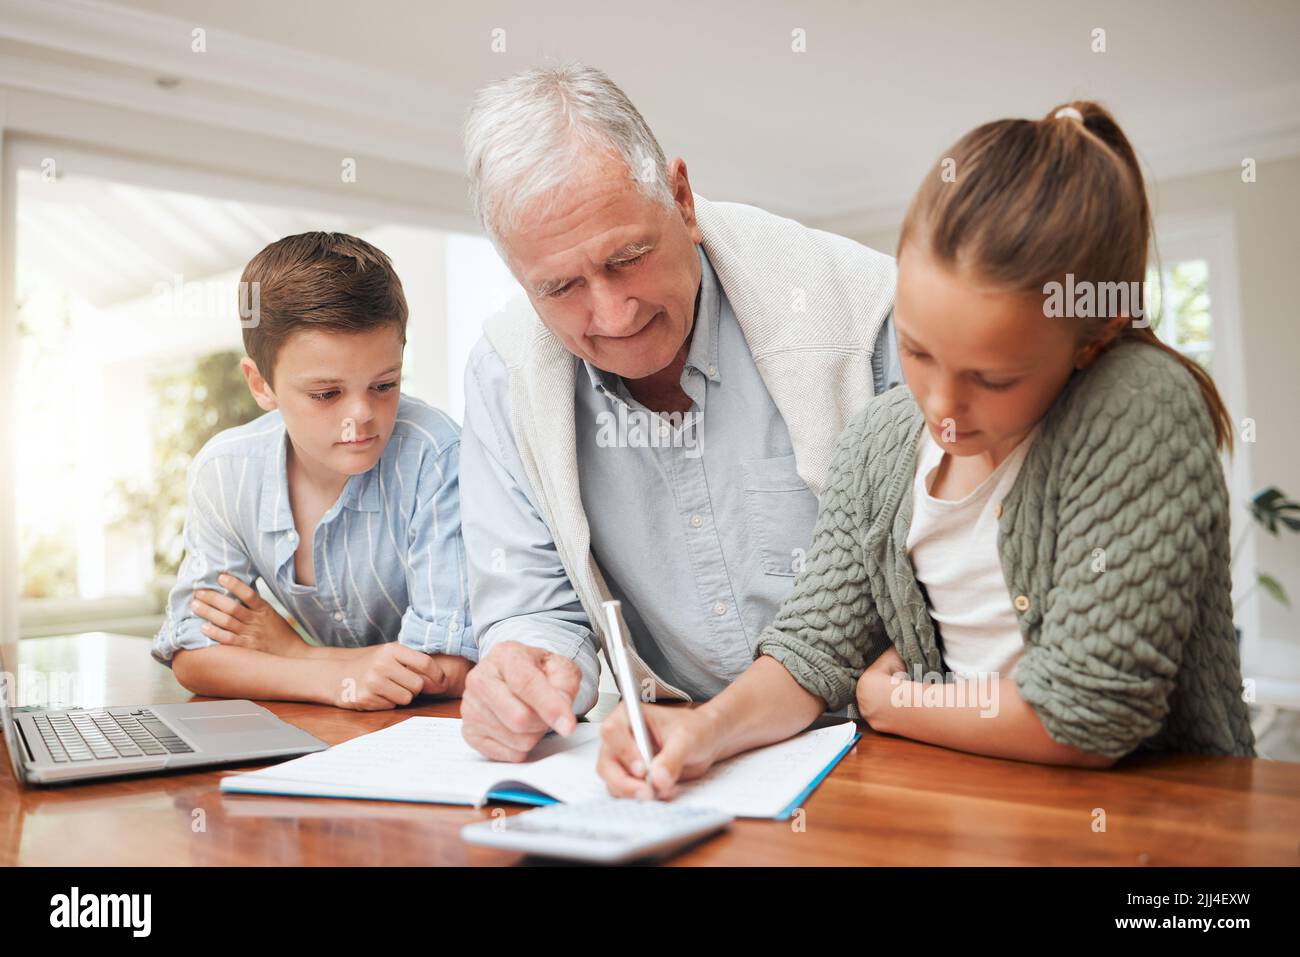 Maybe Ill learn something too. a grandfather helping his grandkids with homework at home. Stock Photo